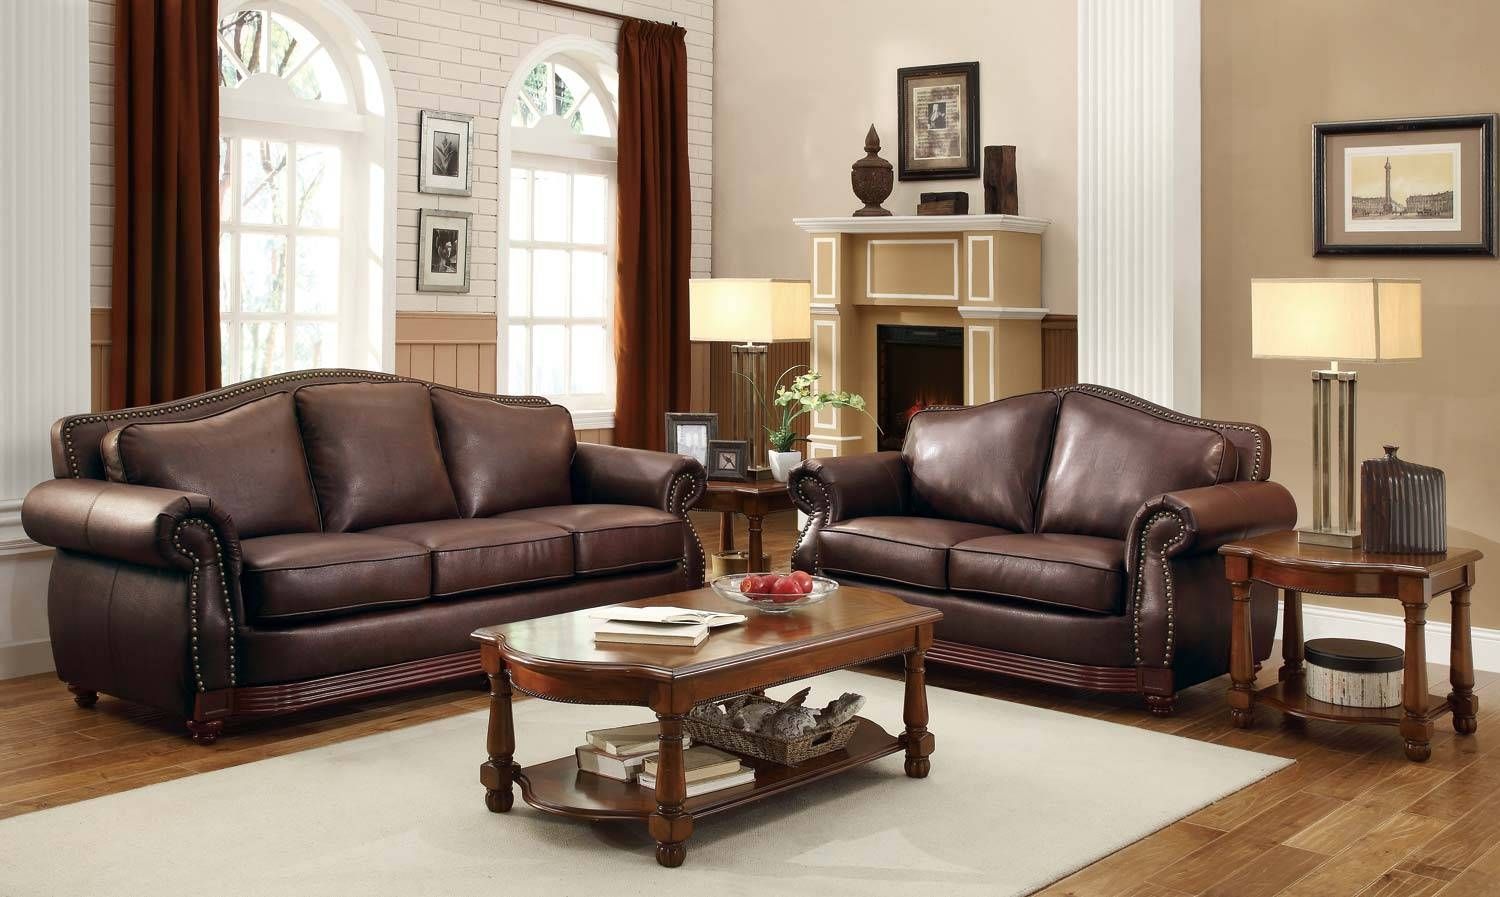 Homelegance Midwood Bonded Leather Sofa Collection – Dark Brown Regarding Bonded Leather Sofas (View 5 of 15)